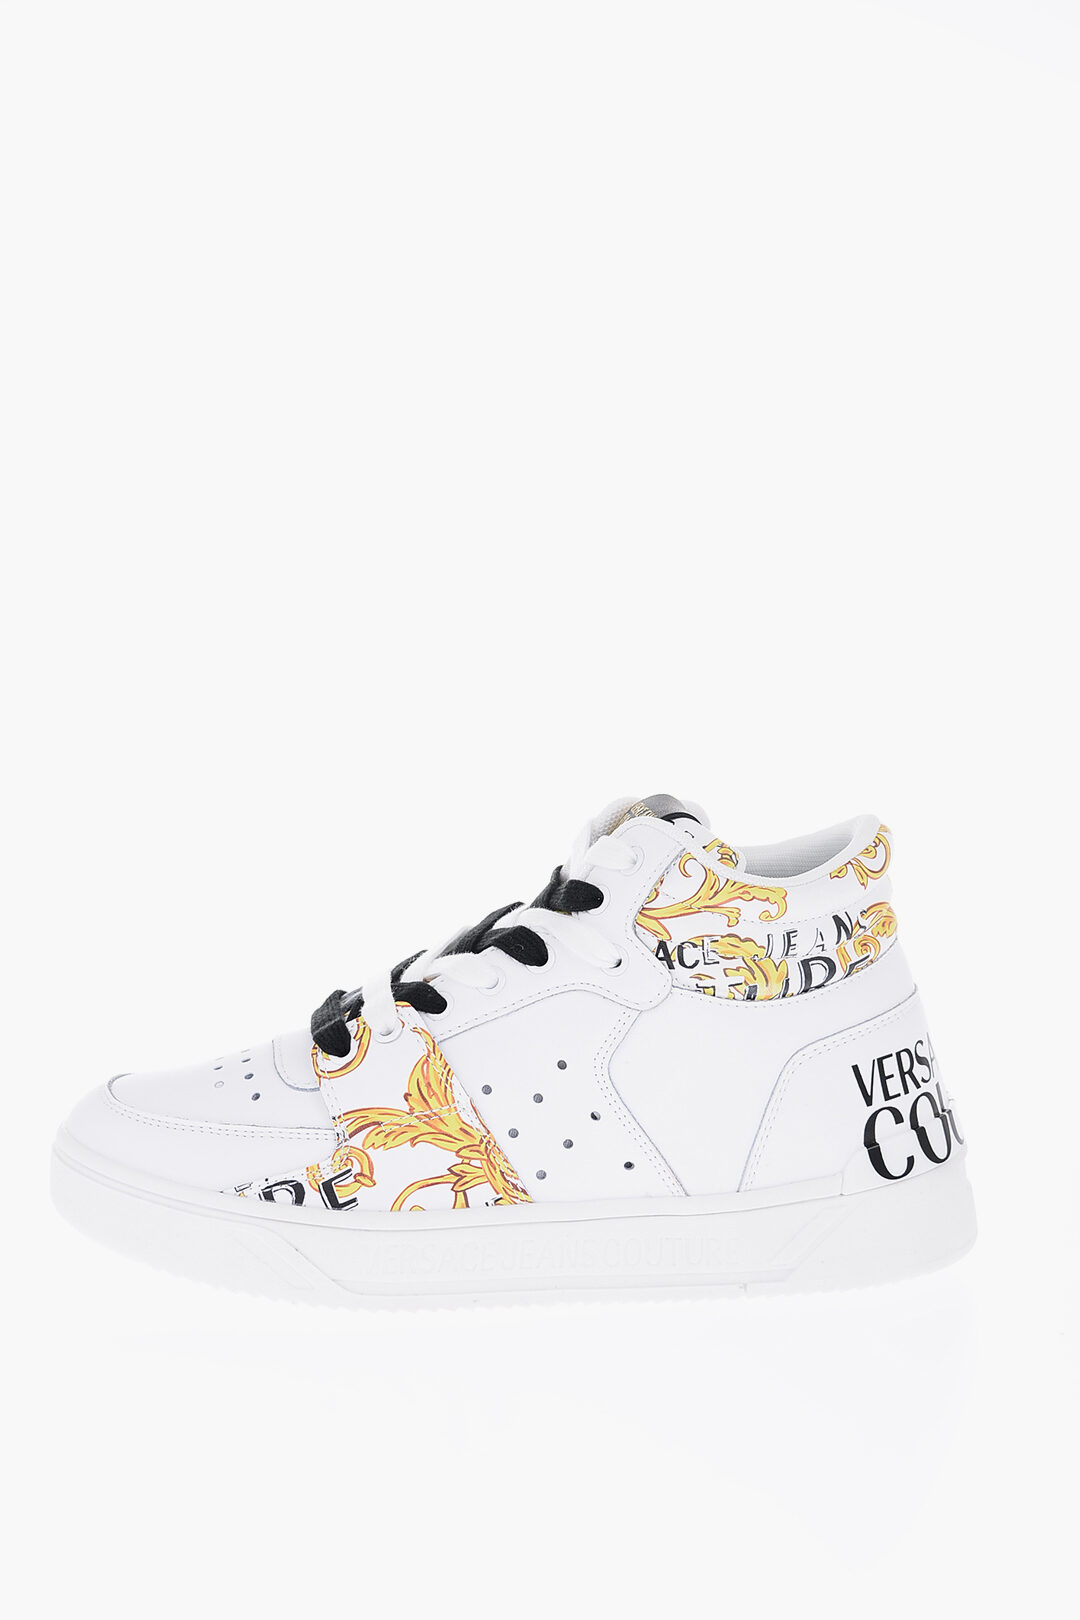 Versace JEANS COUTURE Baroque Printed Leather STARLIGHT High-Top